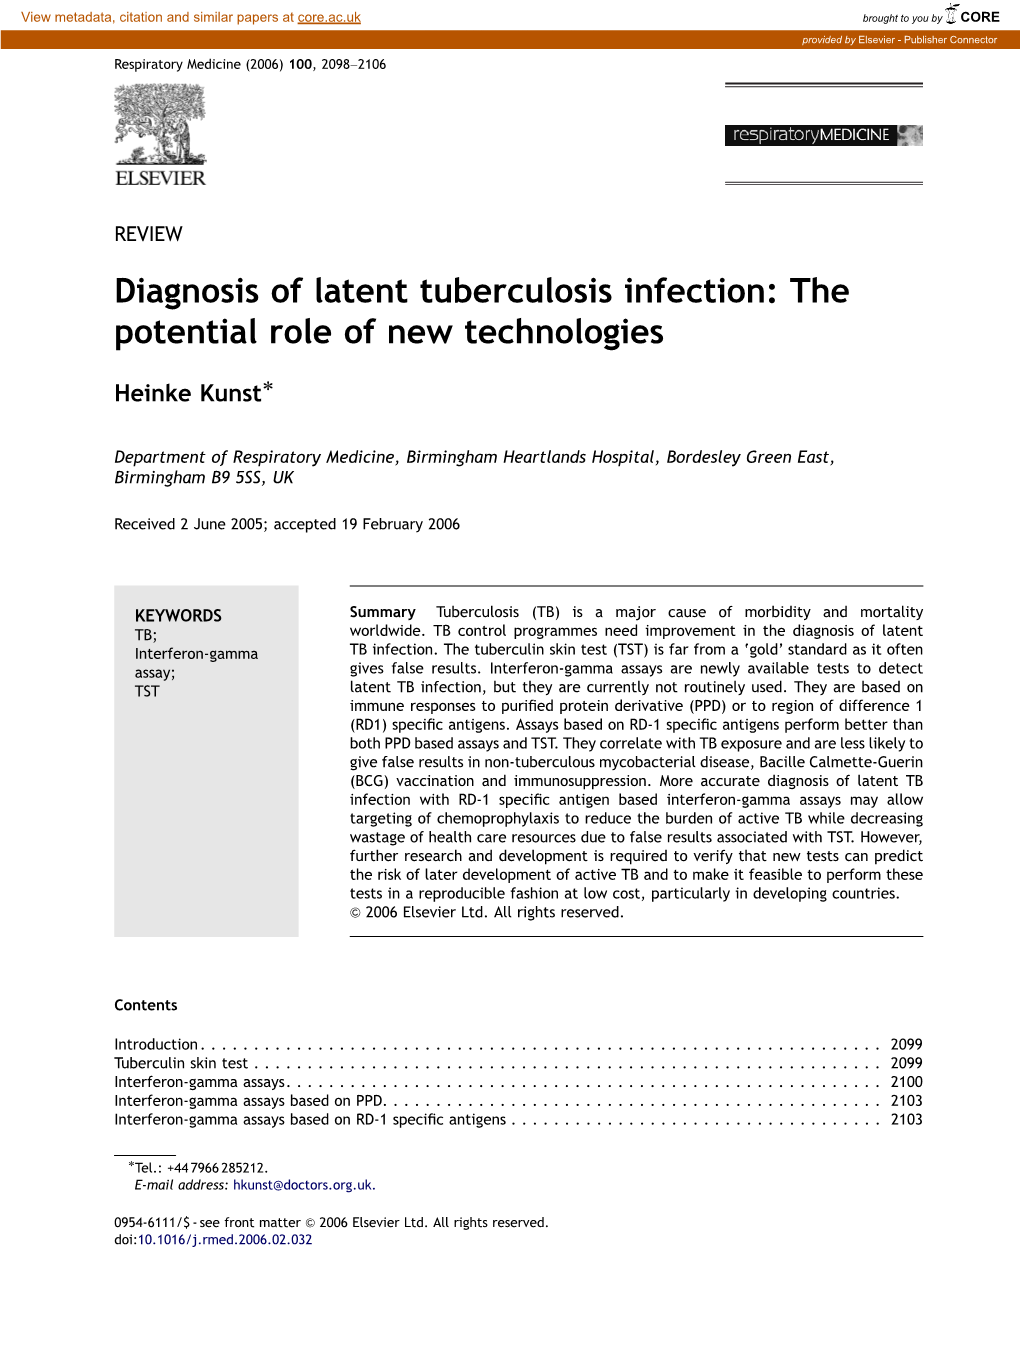 Diagnosis of Latent Tuberculosis Infection: the Potential Role of New Technologies